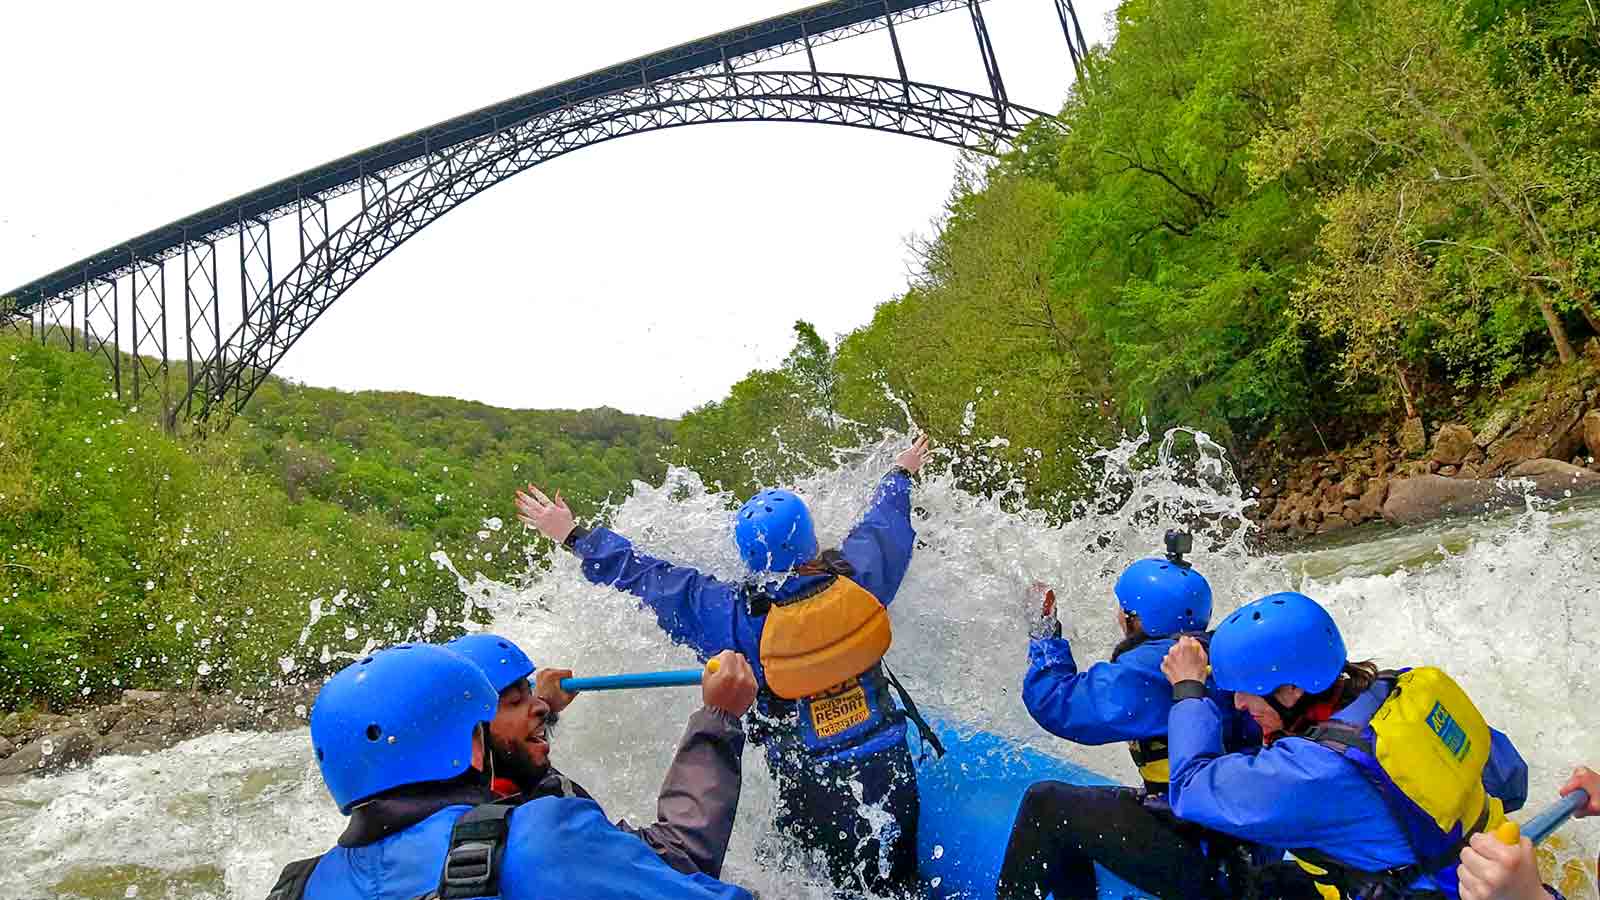 A group of rafters enjoy lower new river gorge white water rafting in fayette staction rapid beneath the new river gorge bridge in the national park.